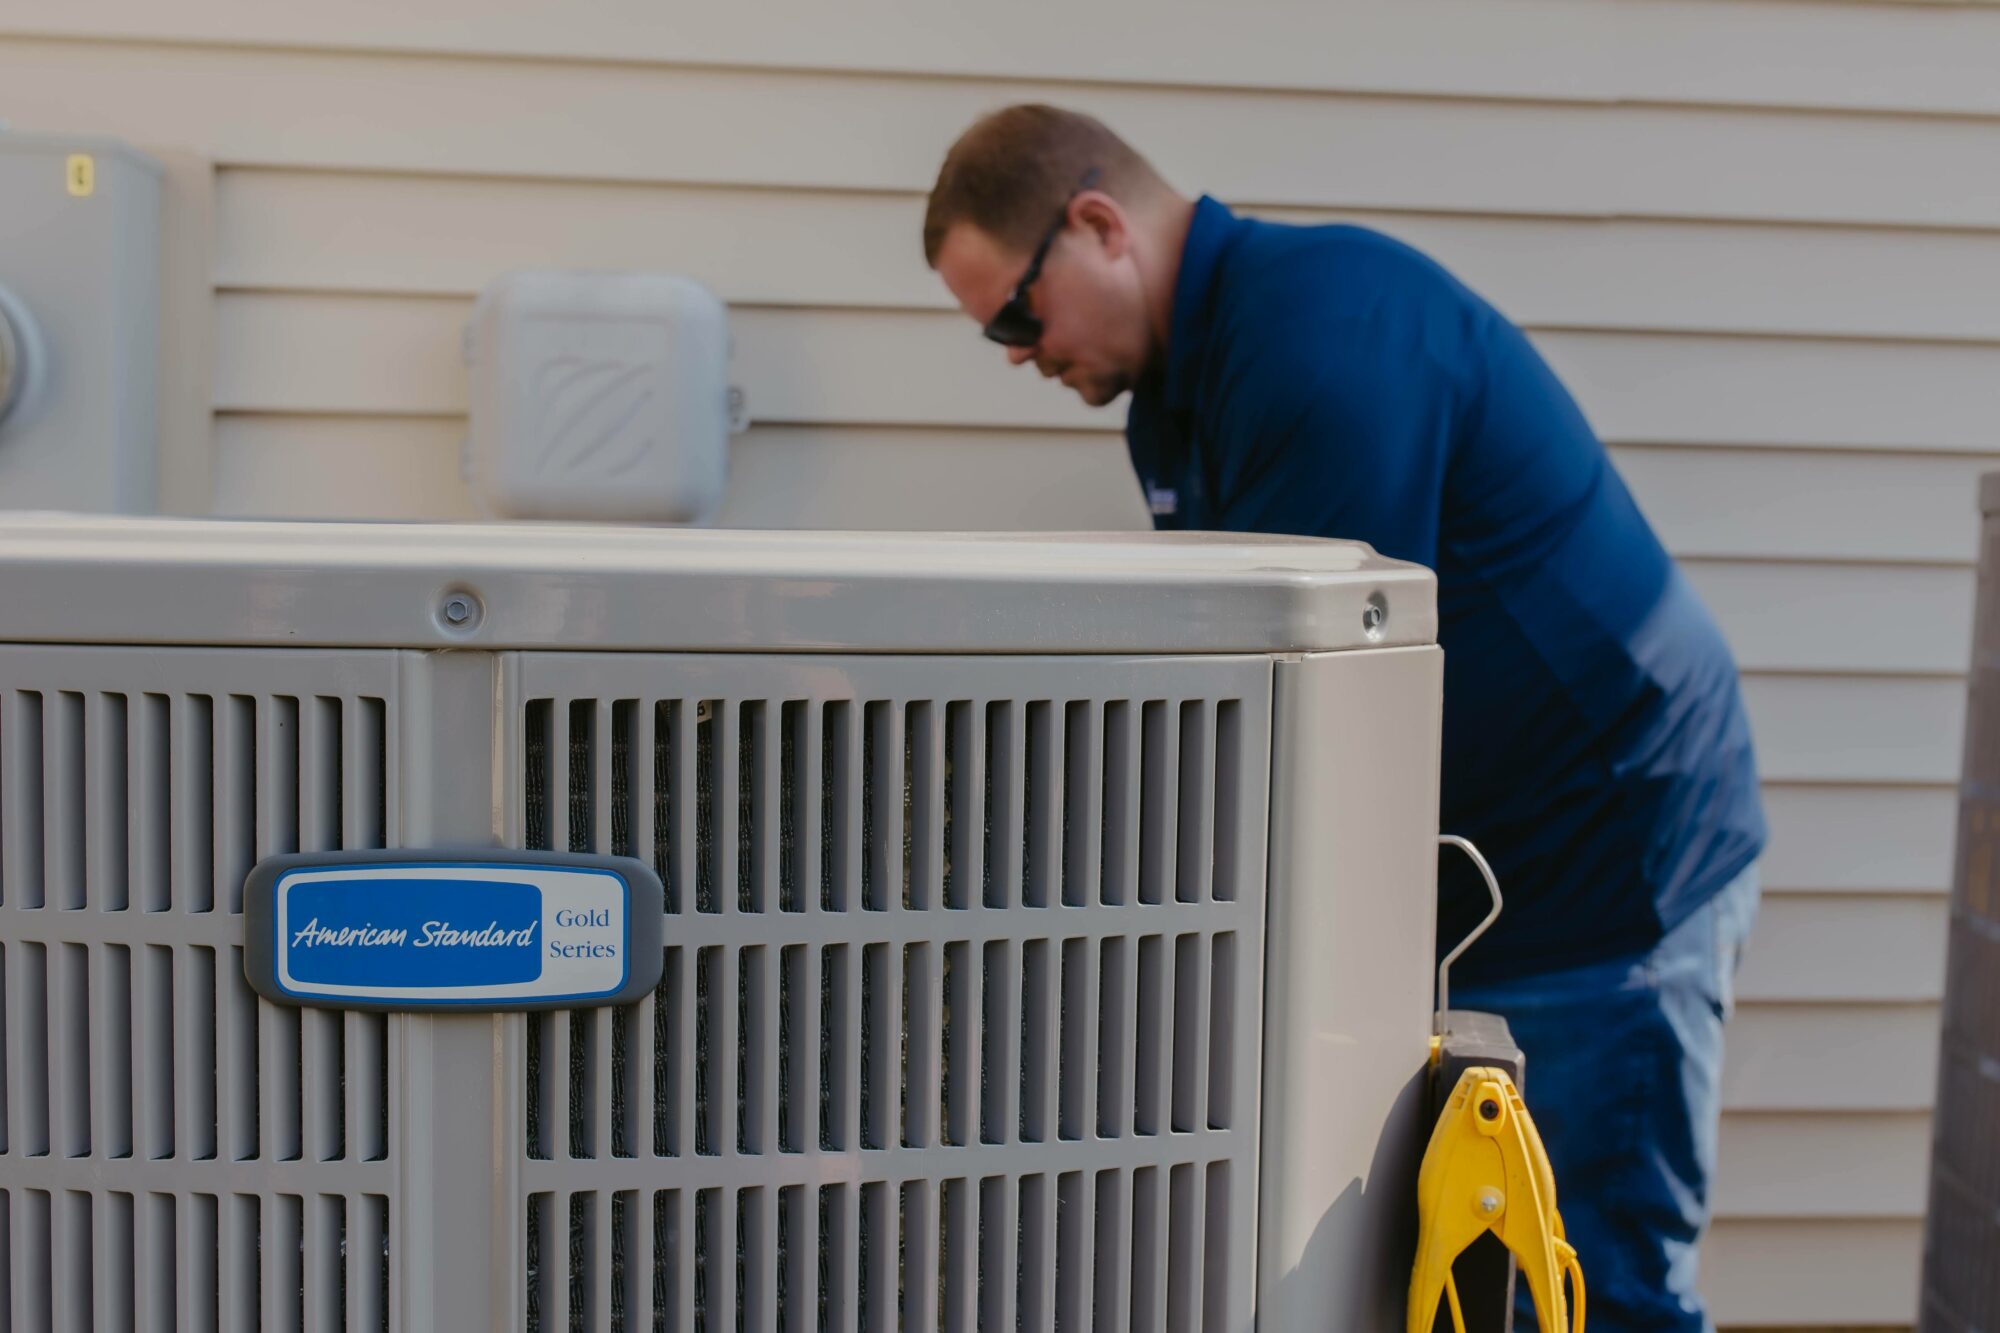 American Standard Air conditioner maintenance, HVAC installation and heating & cooling repair